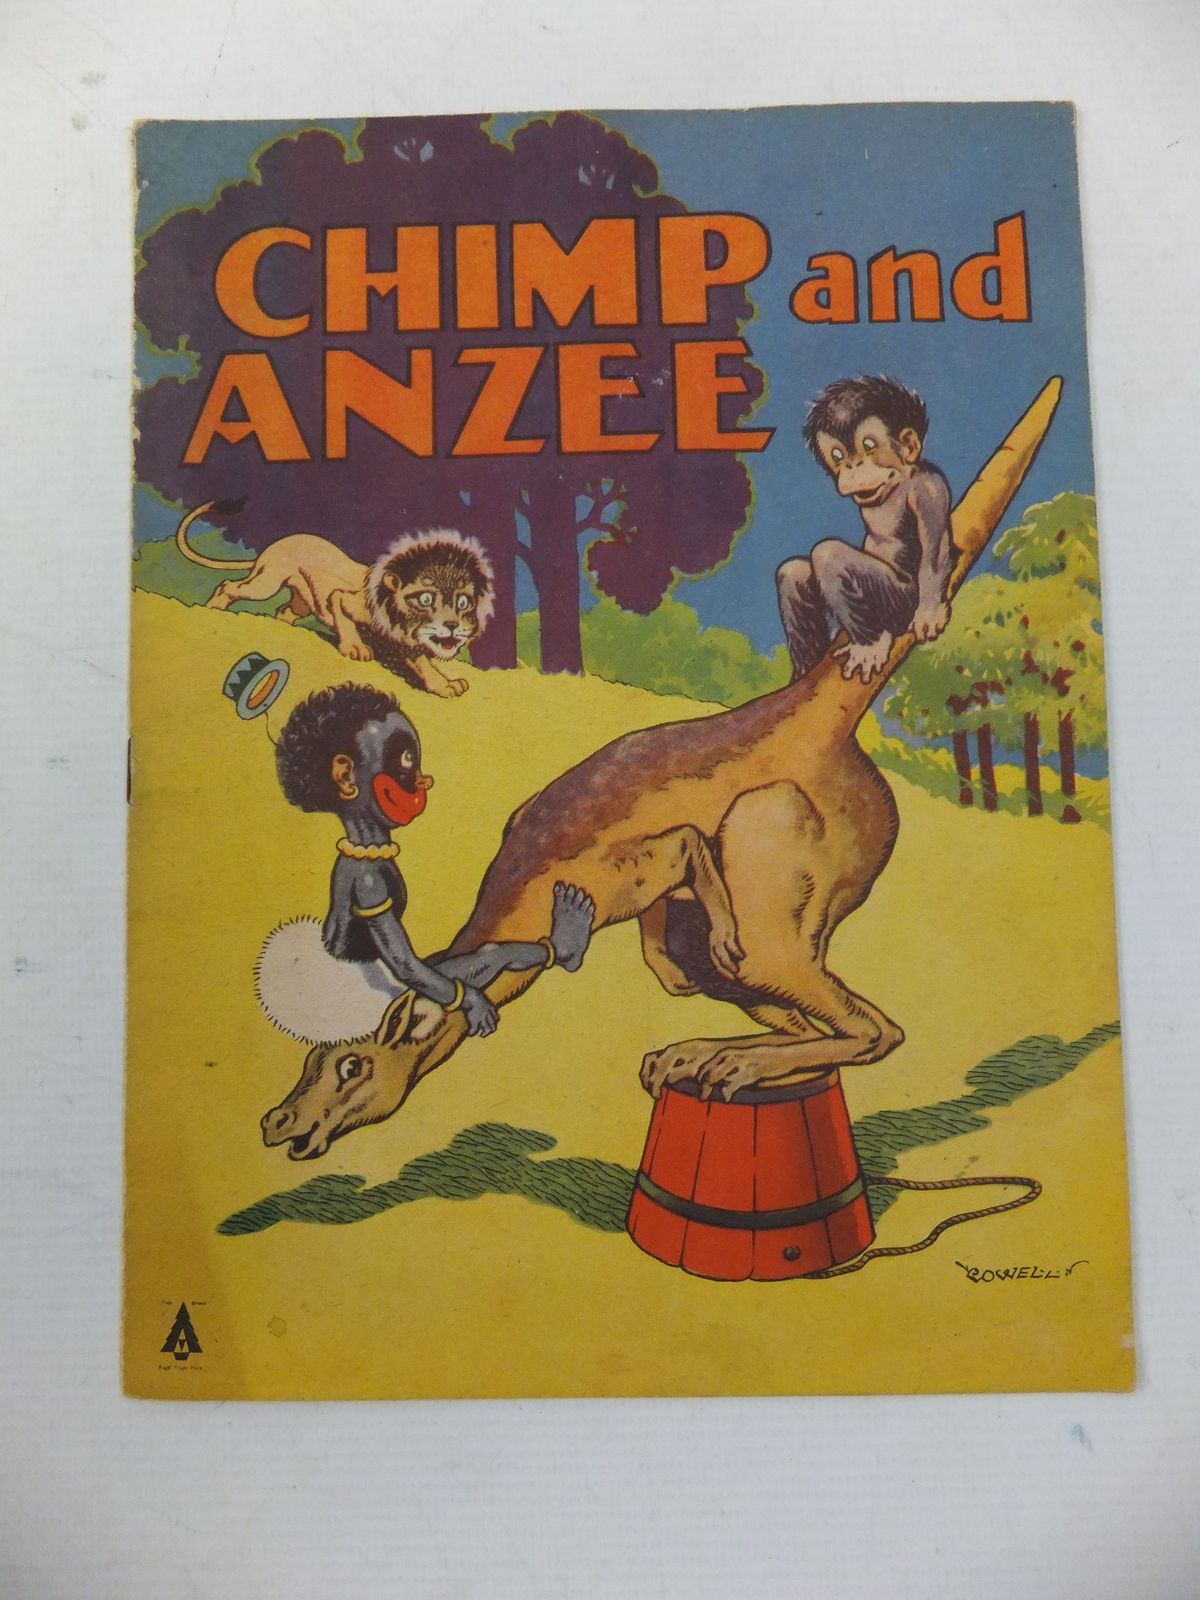 Photo of CHIMP AND ANZEE illustrated by Cowell, published by Amex Company Ltd. (STOCK CODE: 1108888)  for sale by Stella & Rose's Books